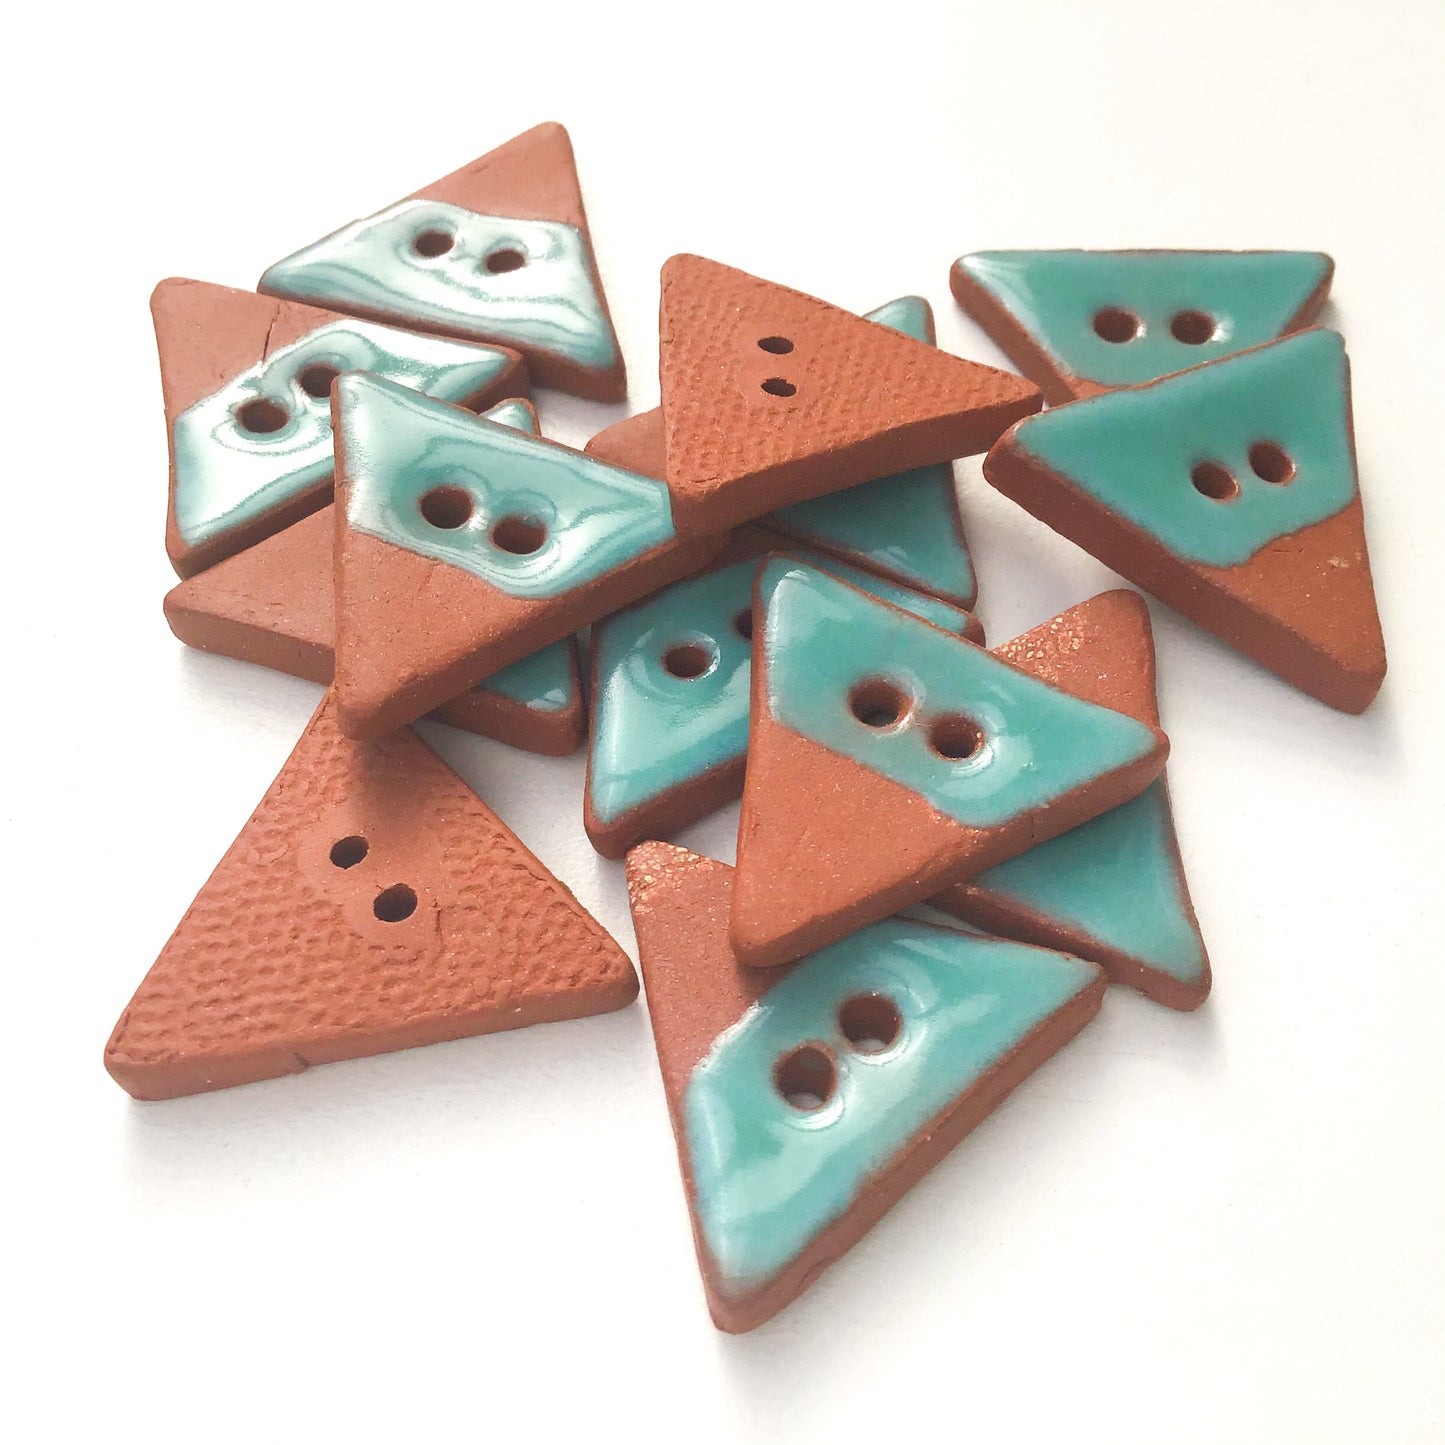 Triangular Ceramic Buttons - Turquoise on Red Clay Buttons - 7/8" x 1" (ws-245)